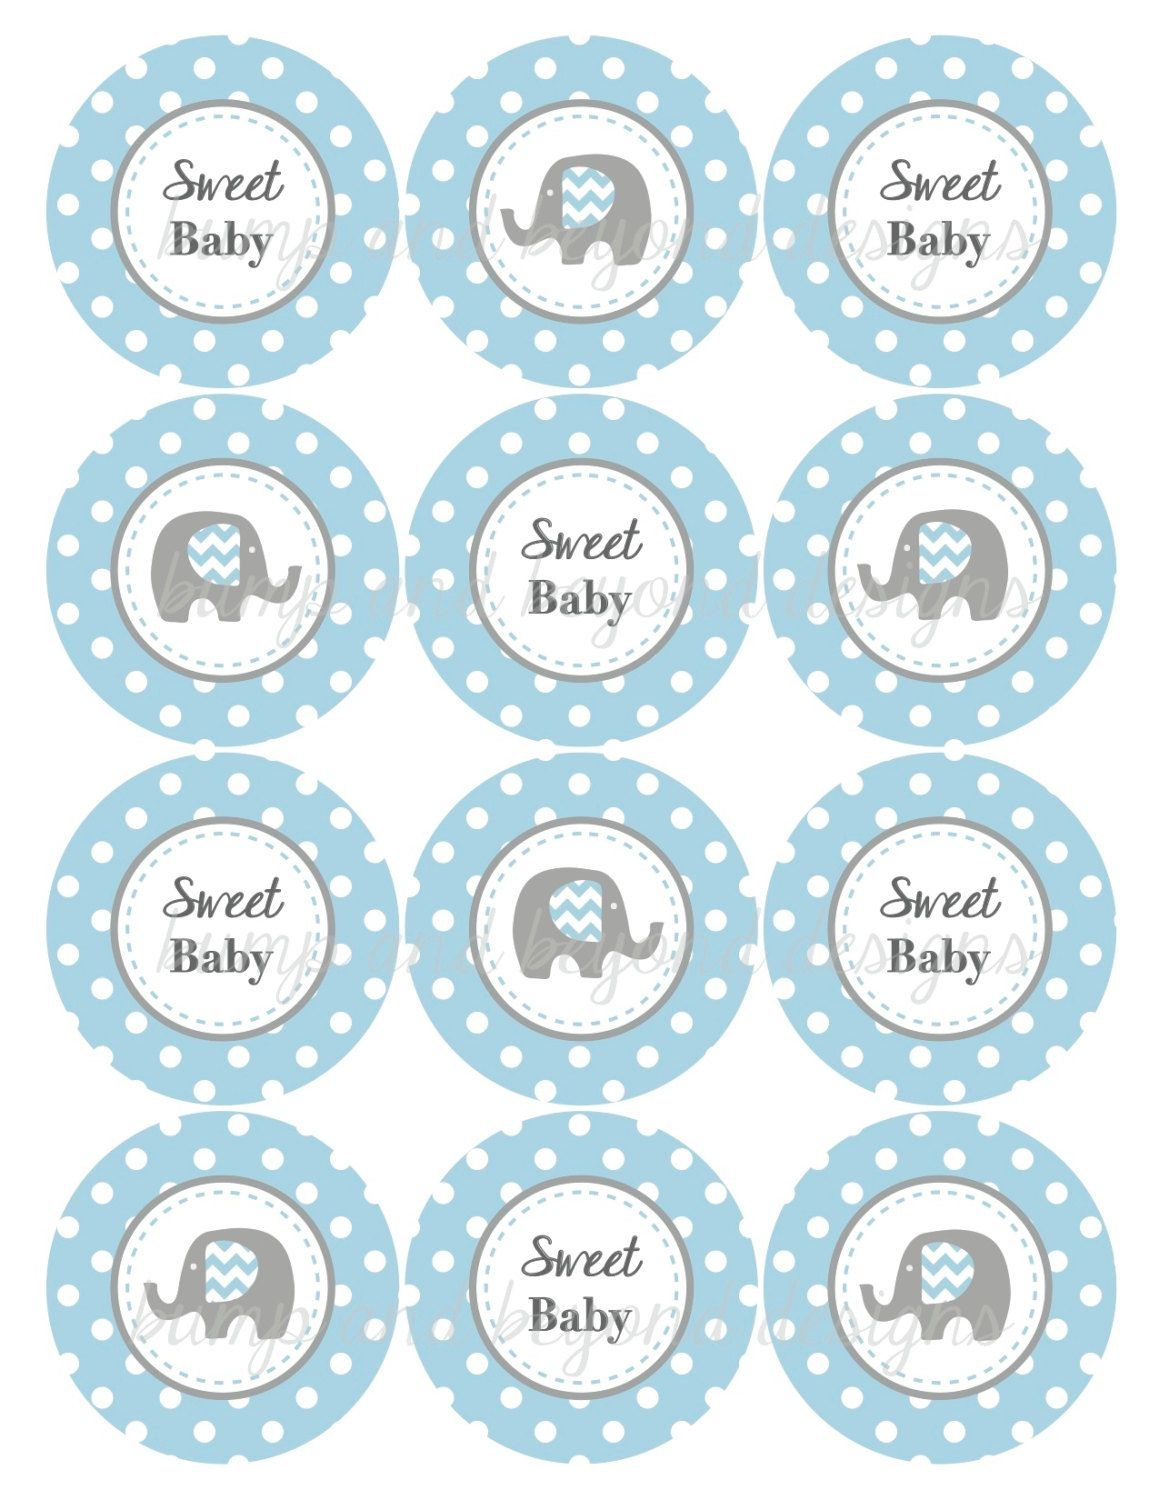 Elephant Baby Shower Ideas For A Boy - Google Search | Stuff To Buy - Free Printable Elephant Baby Shower